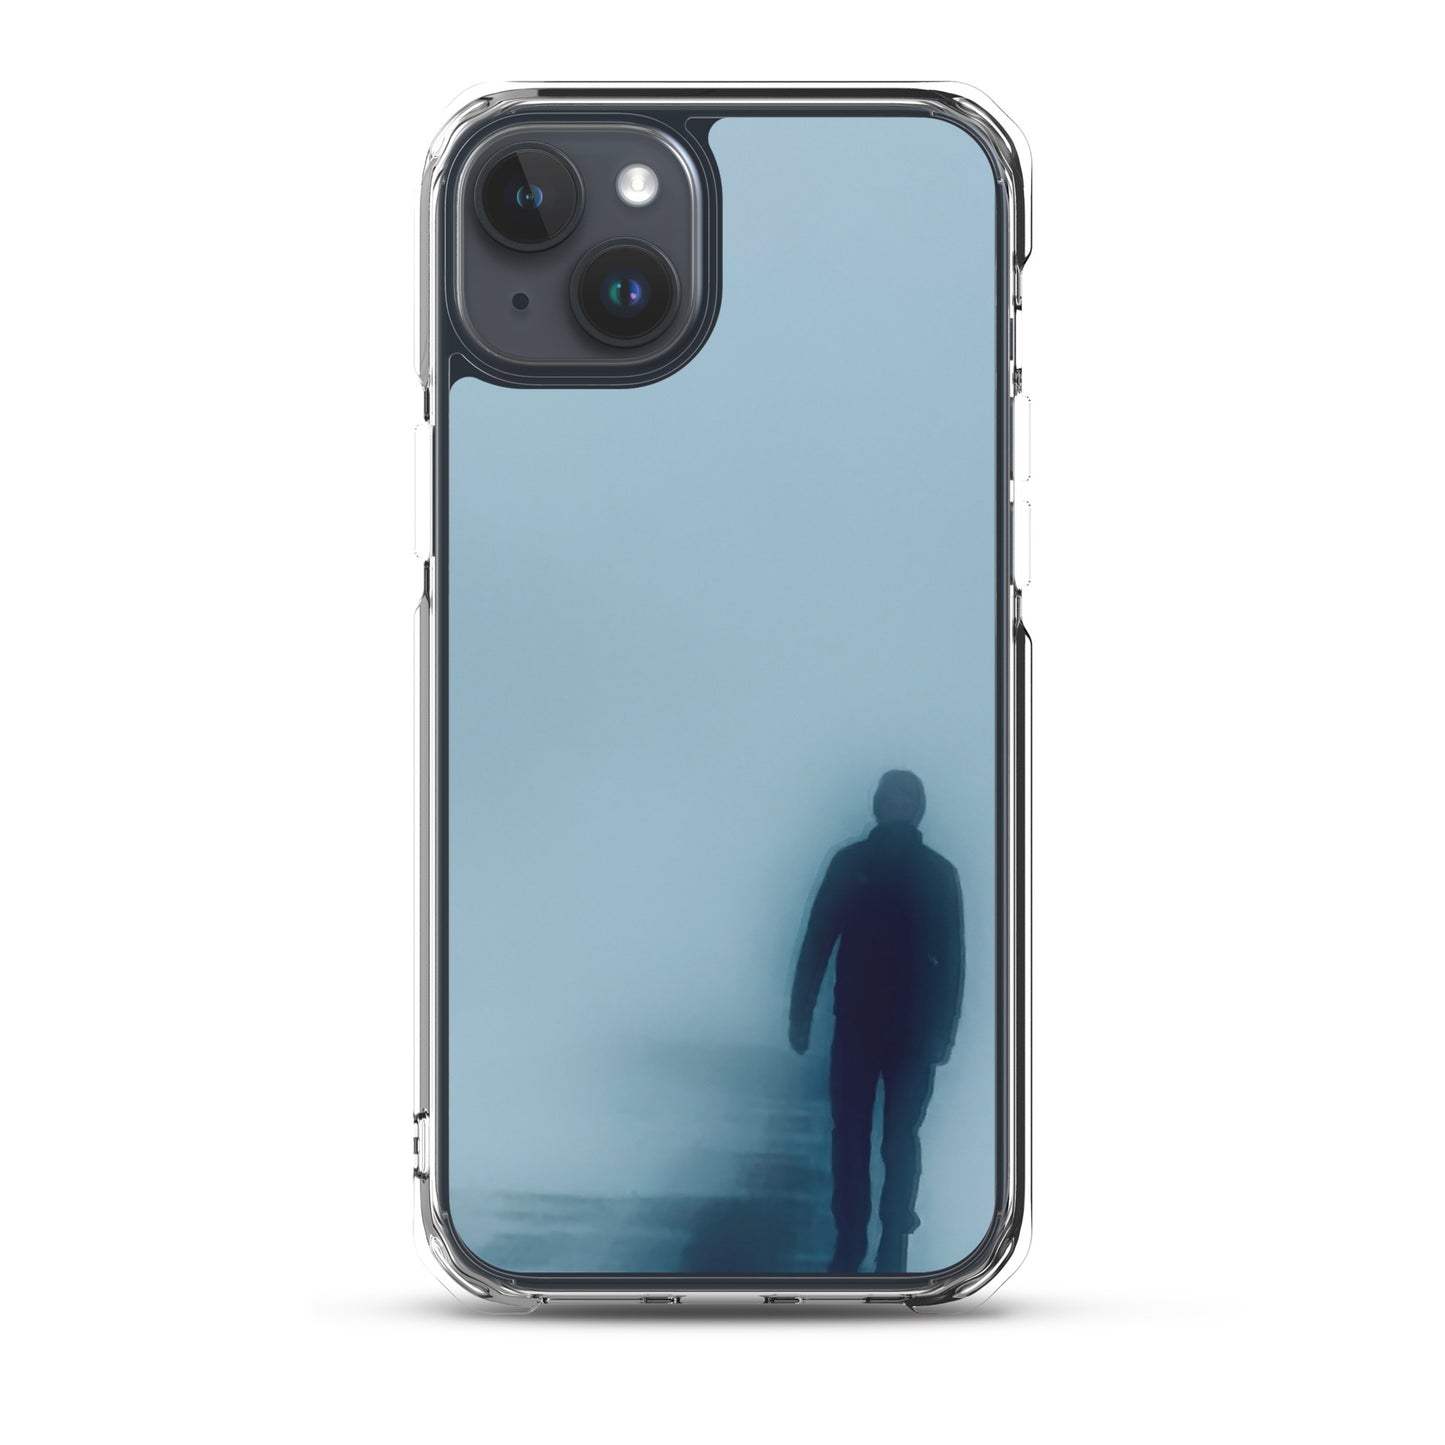 Into the fog (iPhone Case)